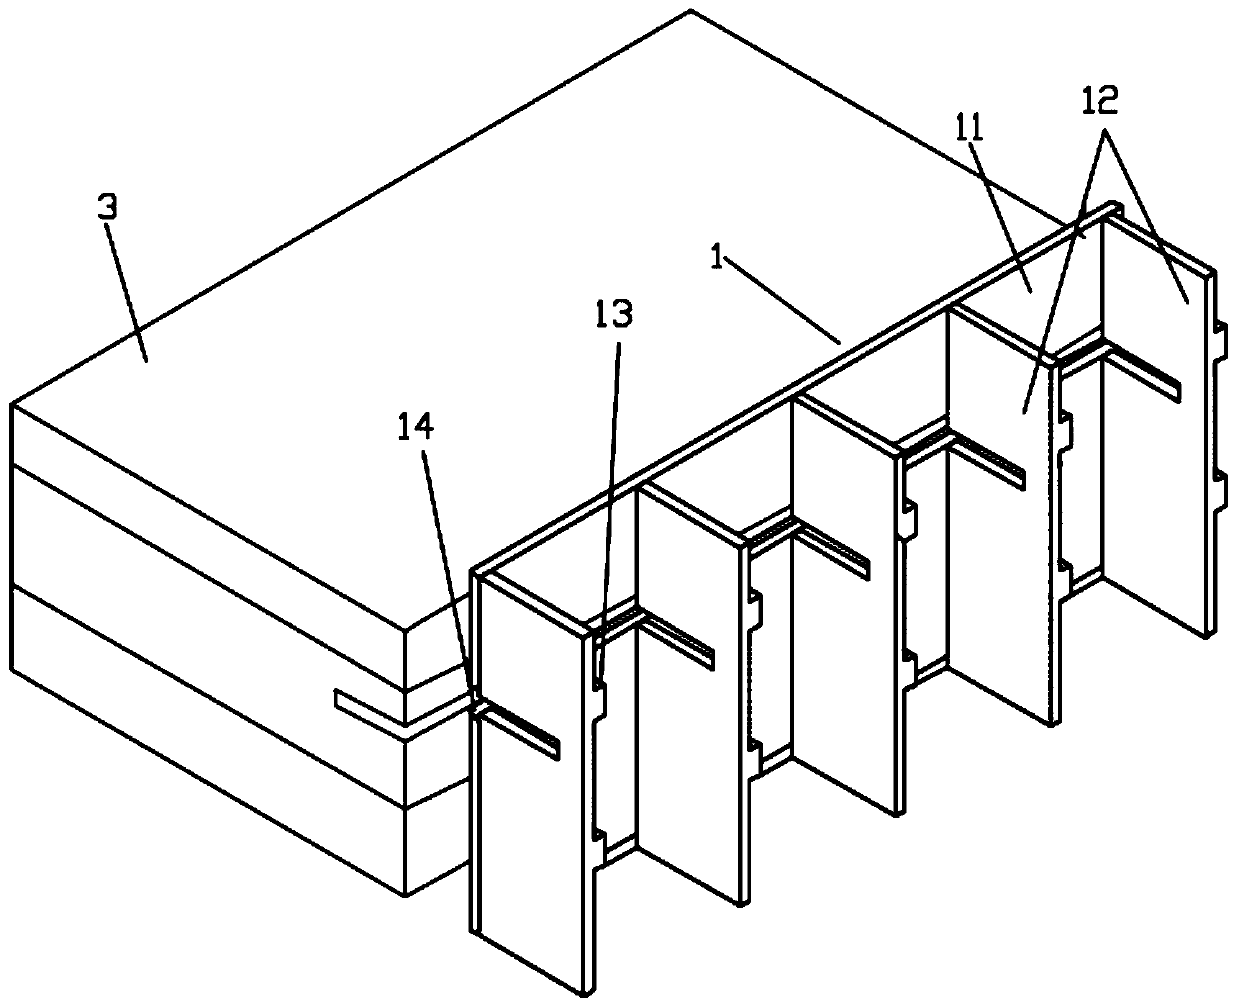 Water stop structure applied to concrete foundation construction and construction method